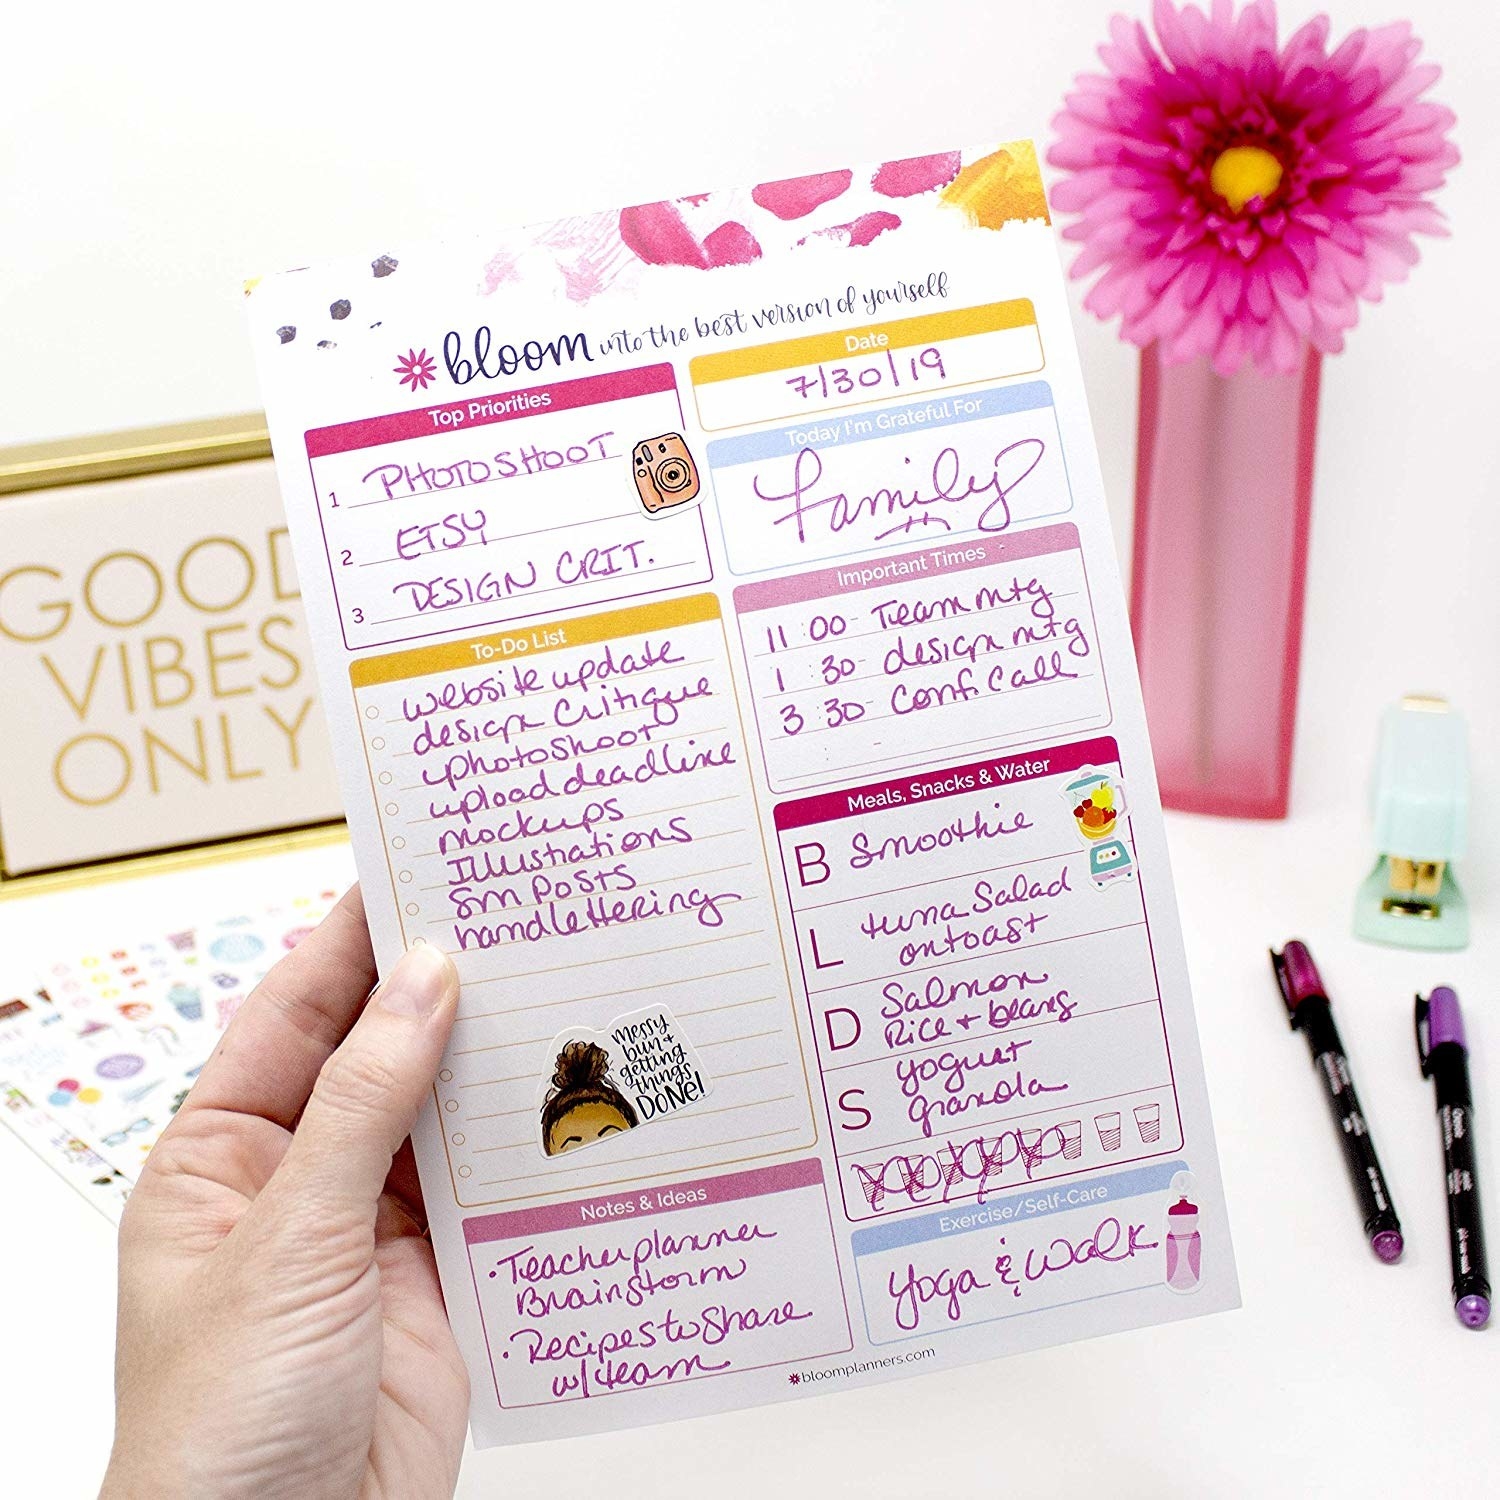 A hand holding up a sheet of the planning pad in the pink and yellow color scheme